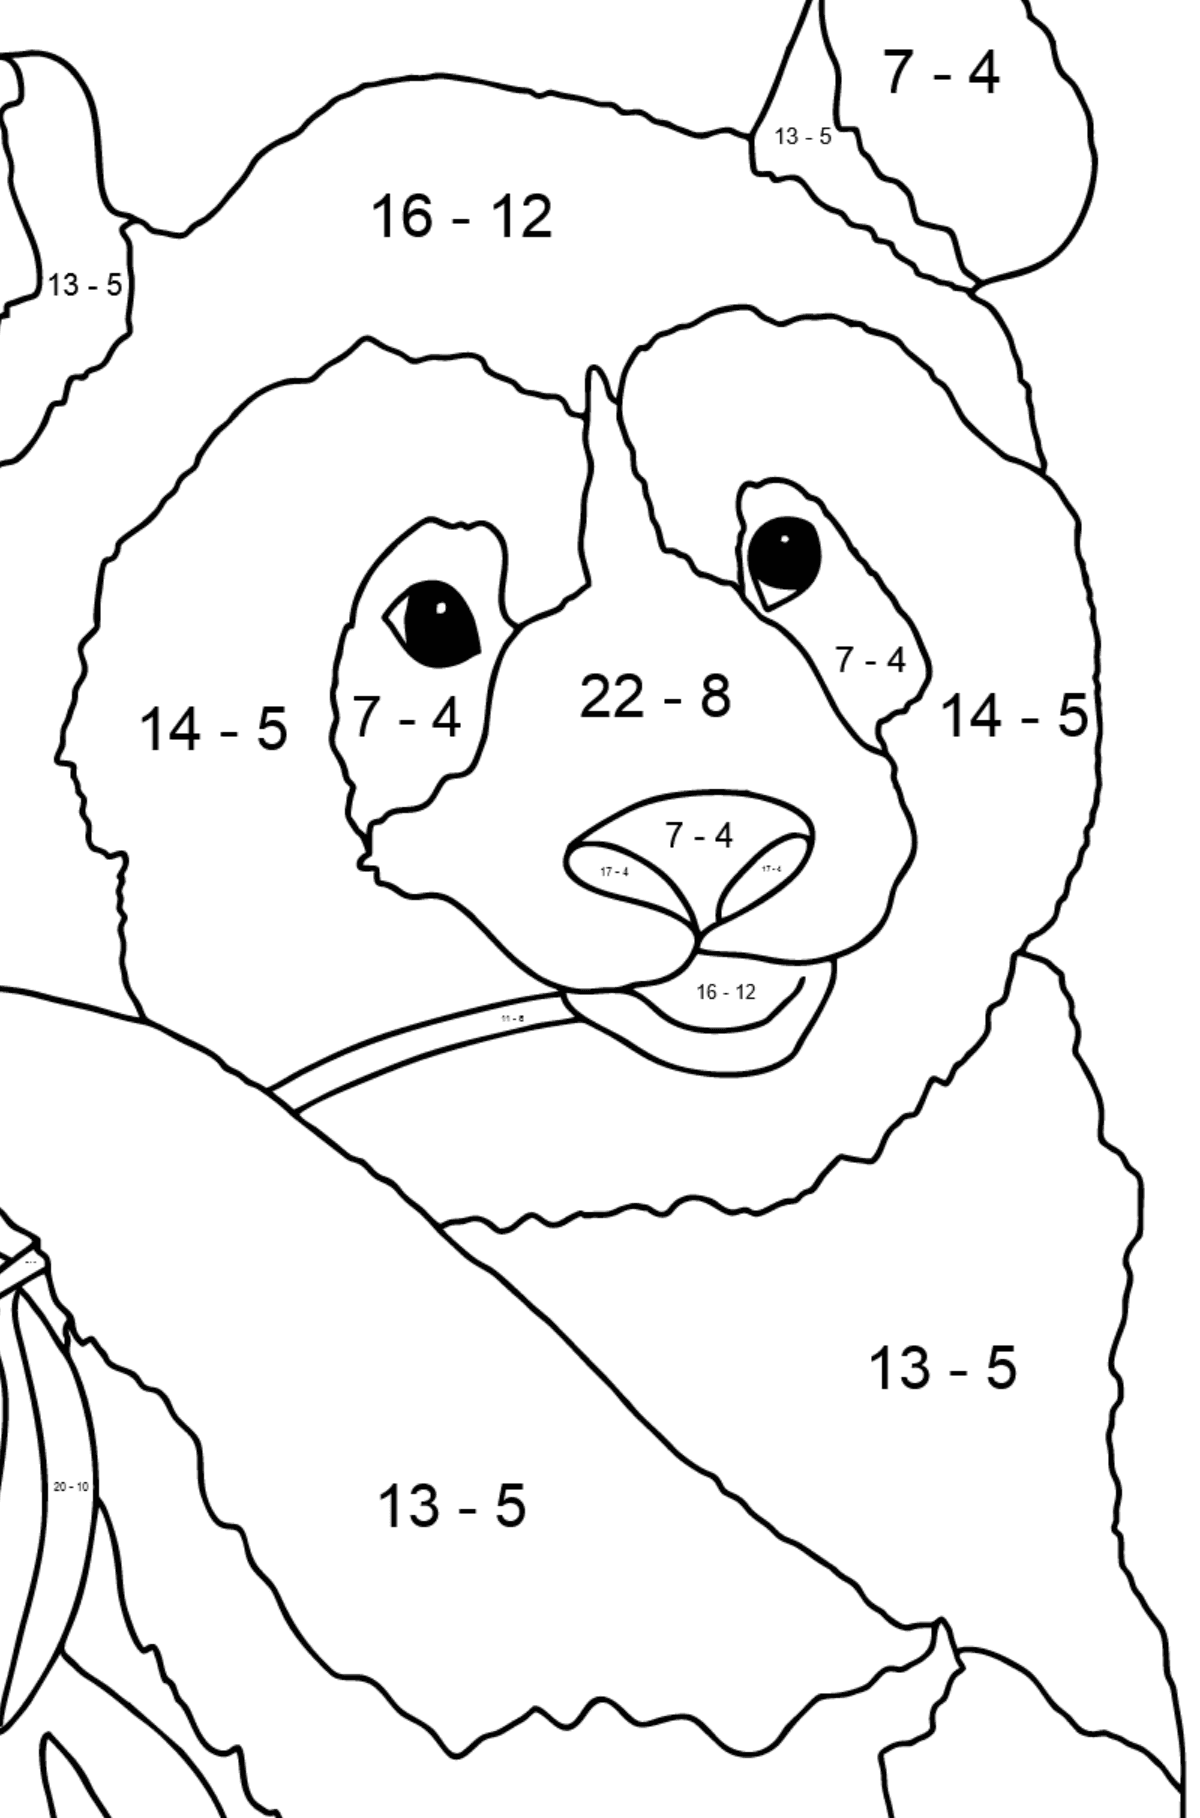 Coloring Page - A Panda is Eating Bamboo Stems and Leaves - Math Coloring - Subtraction for Kids